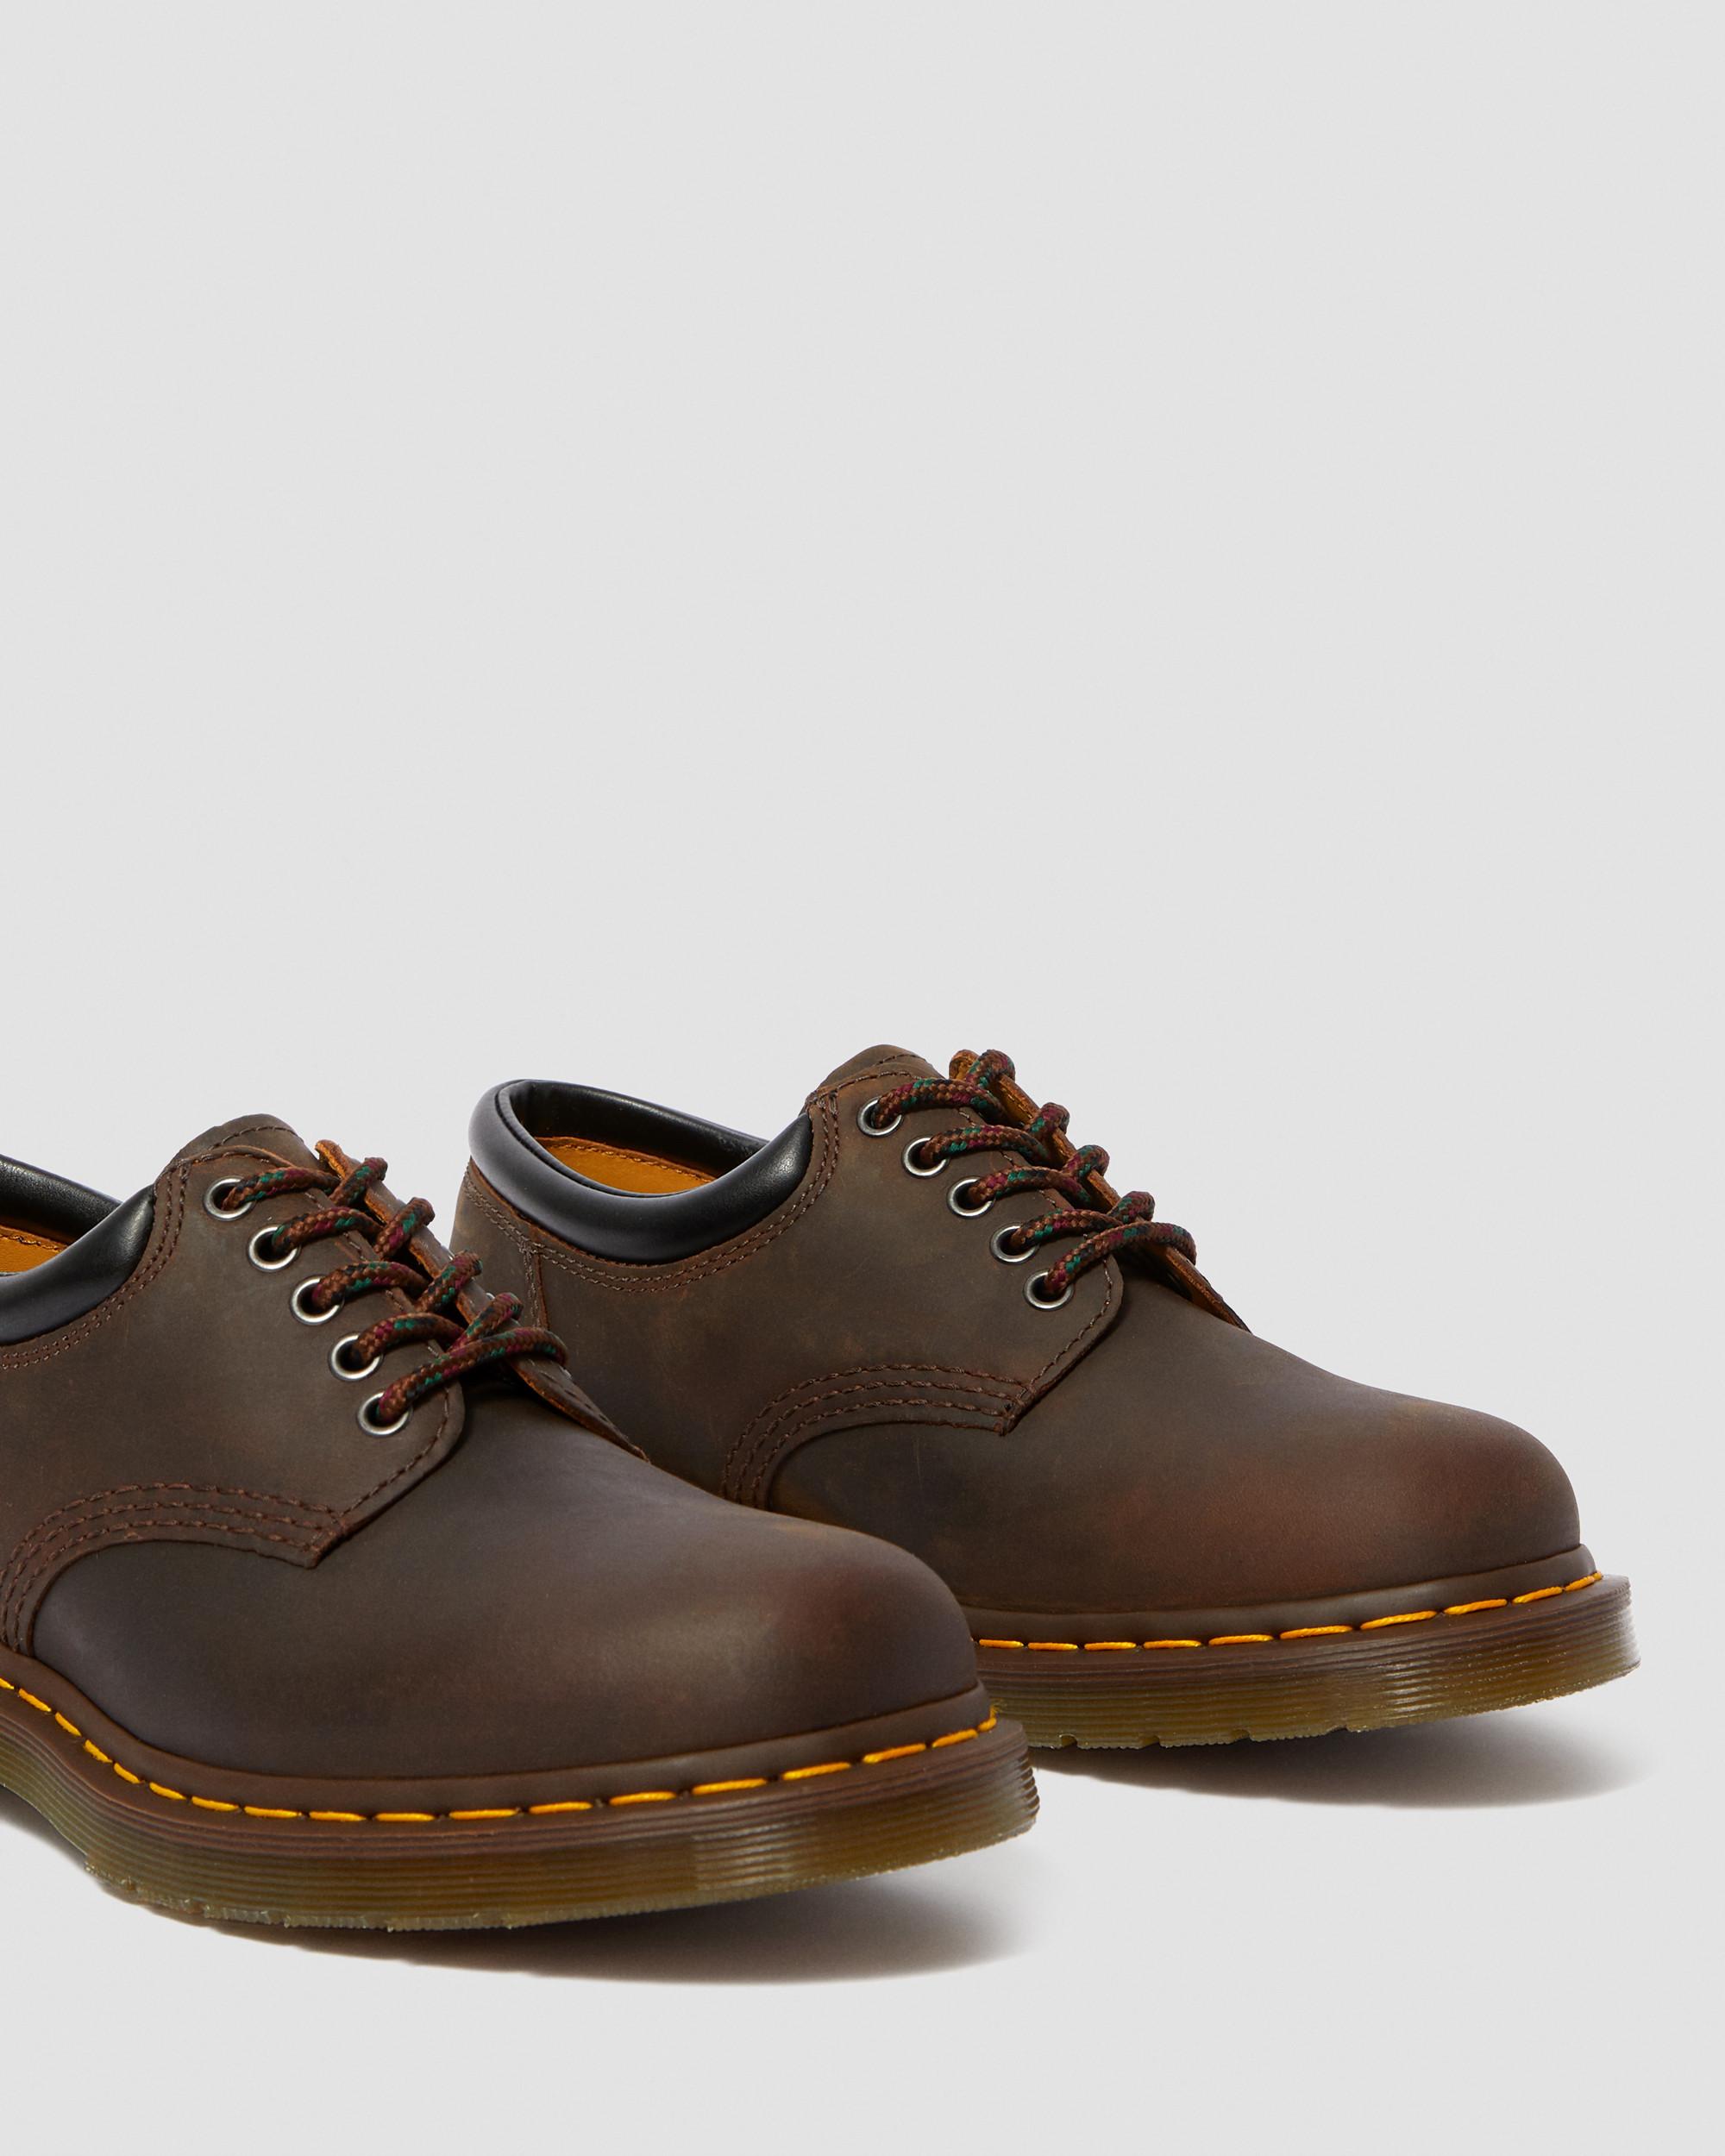 8053 Crazy Horse Leather Casual Shoes in Dark Brown | Dr. Martens